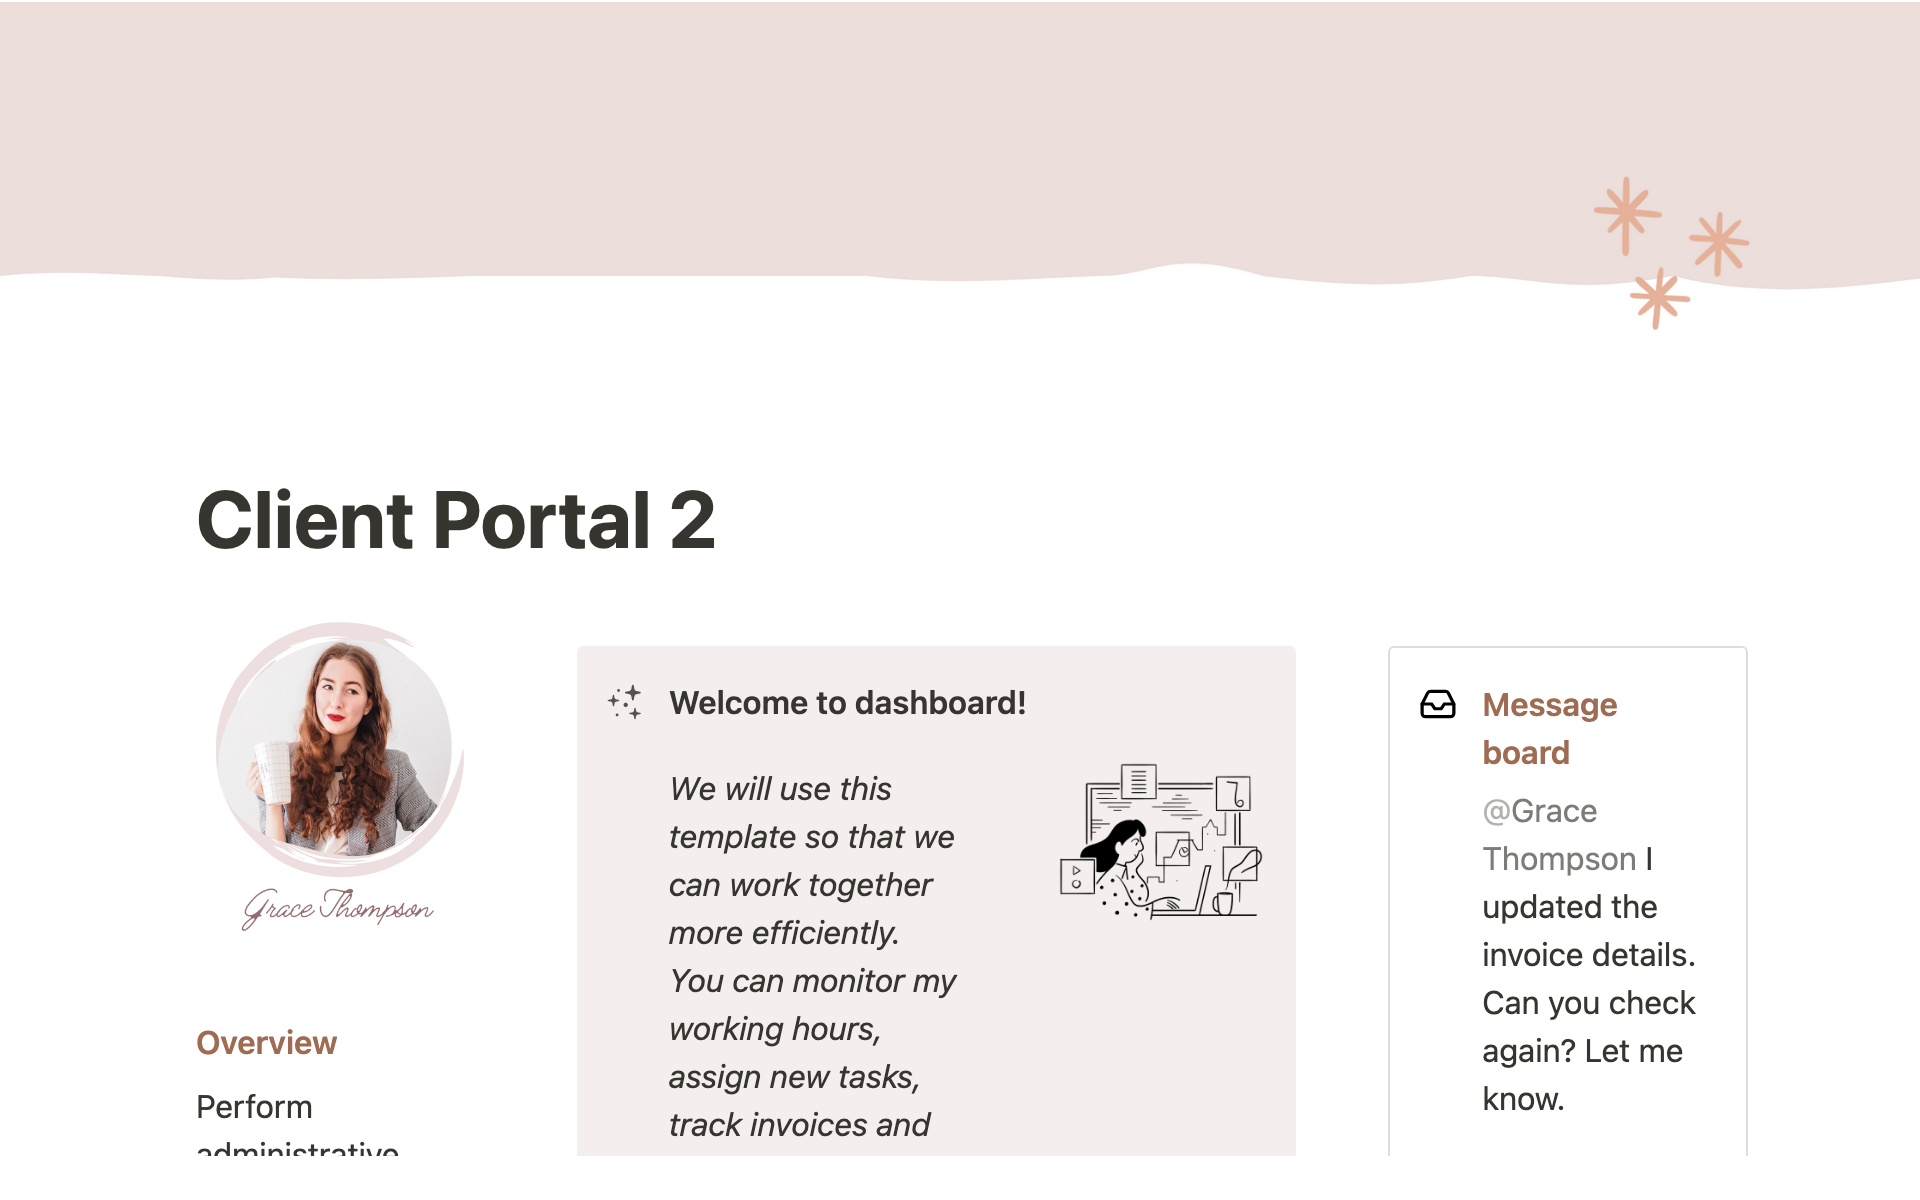 This Notion template will be a central dashboard where you can share documents and track projects together.